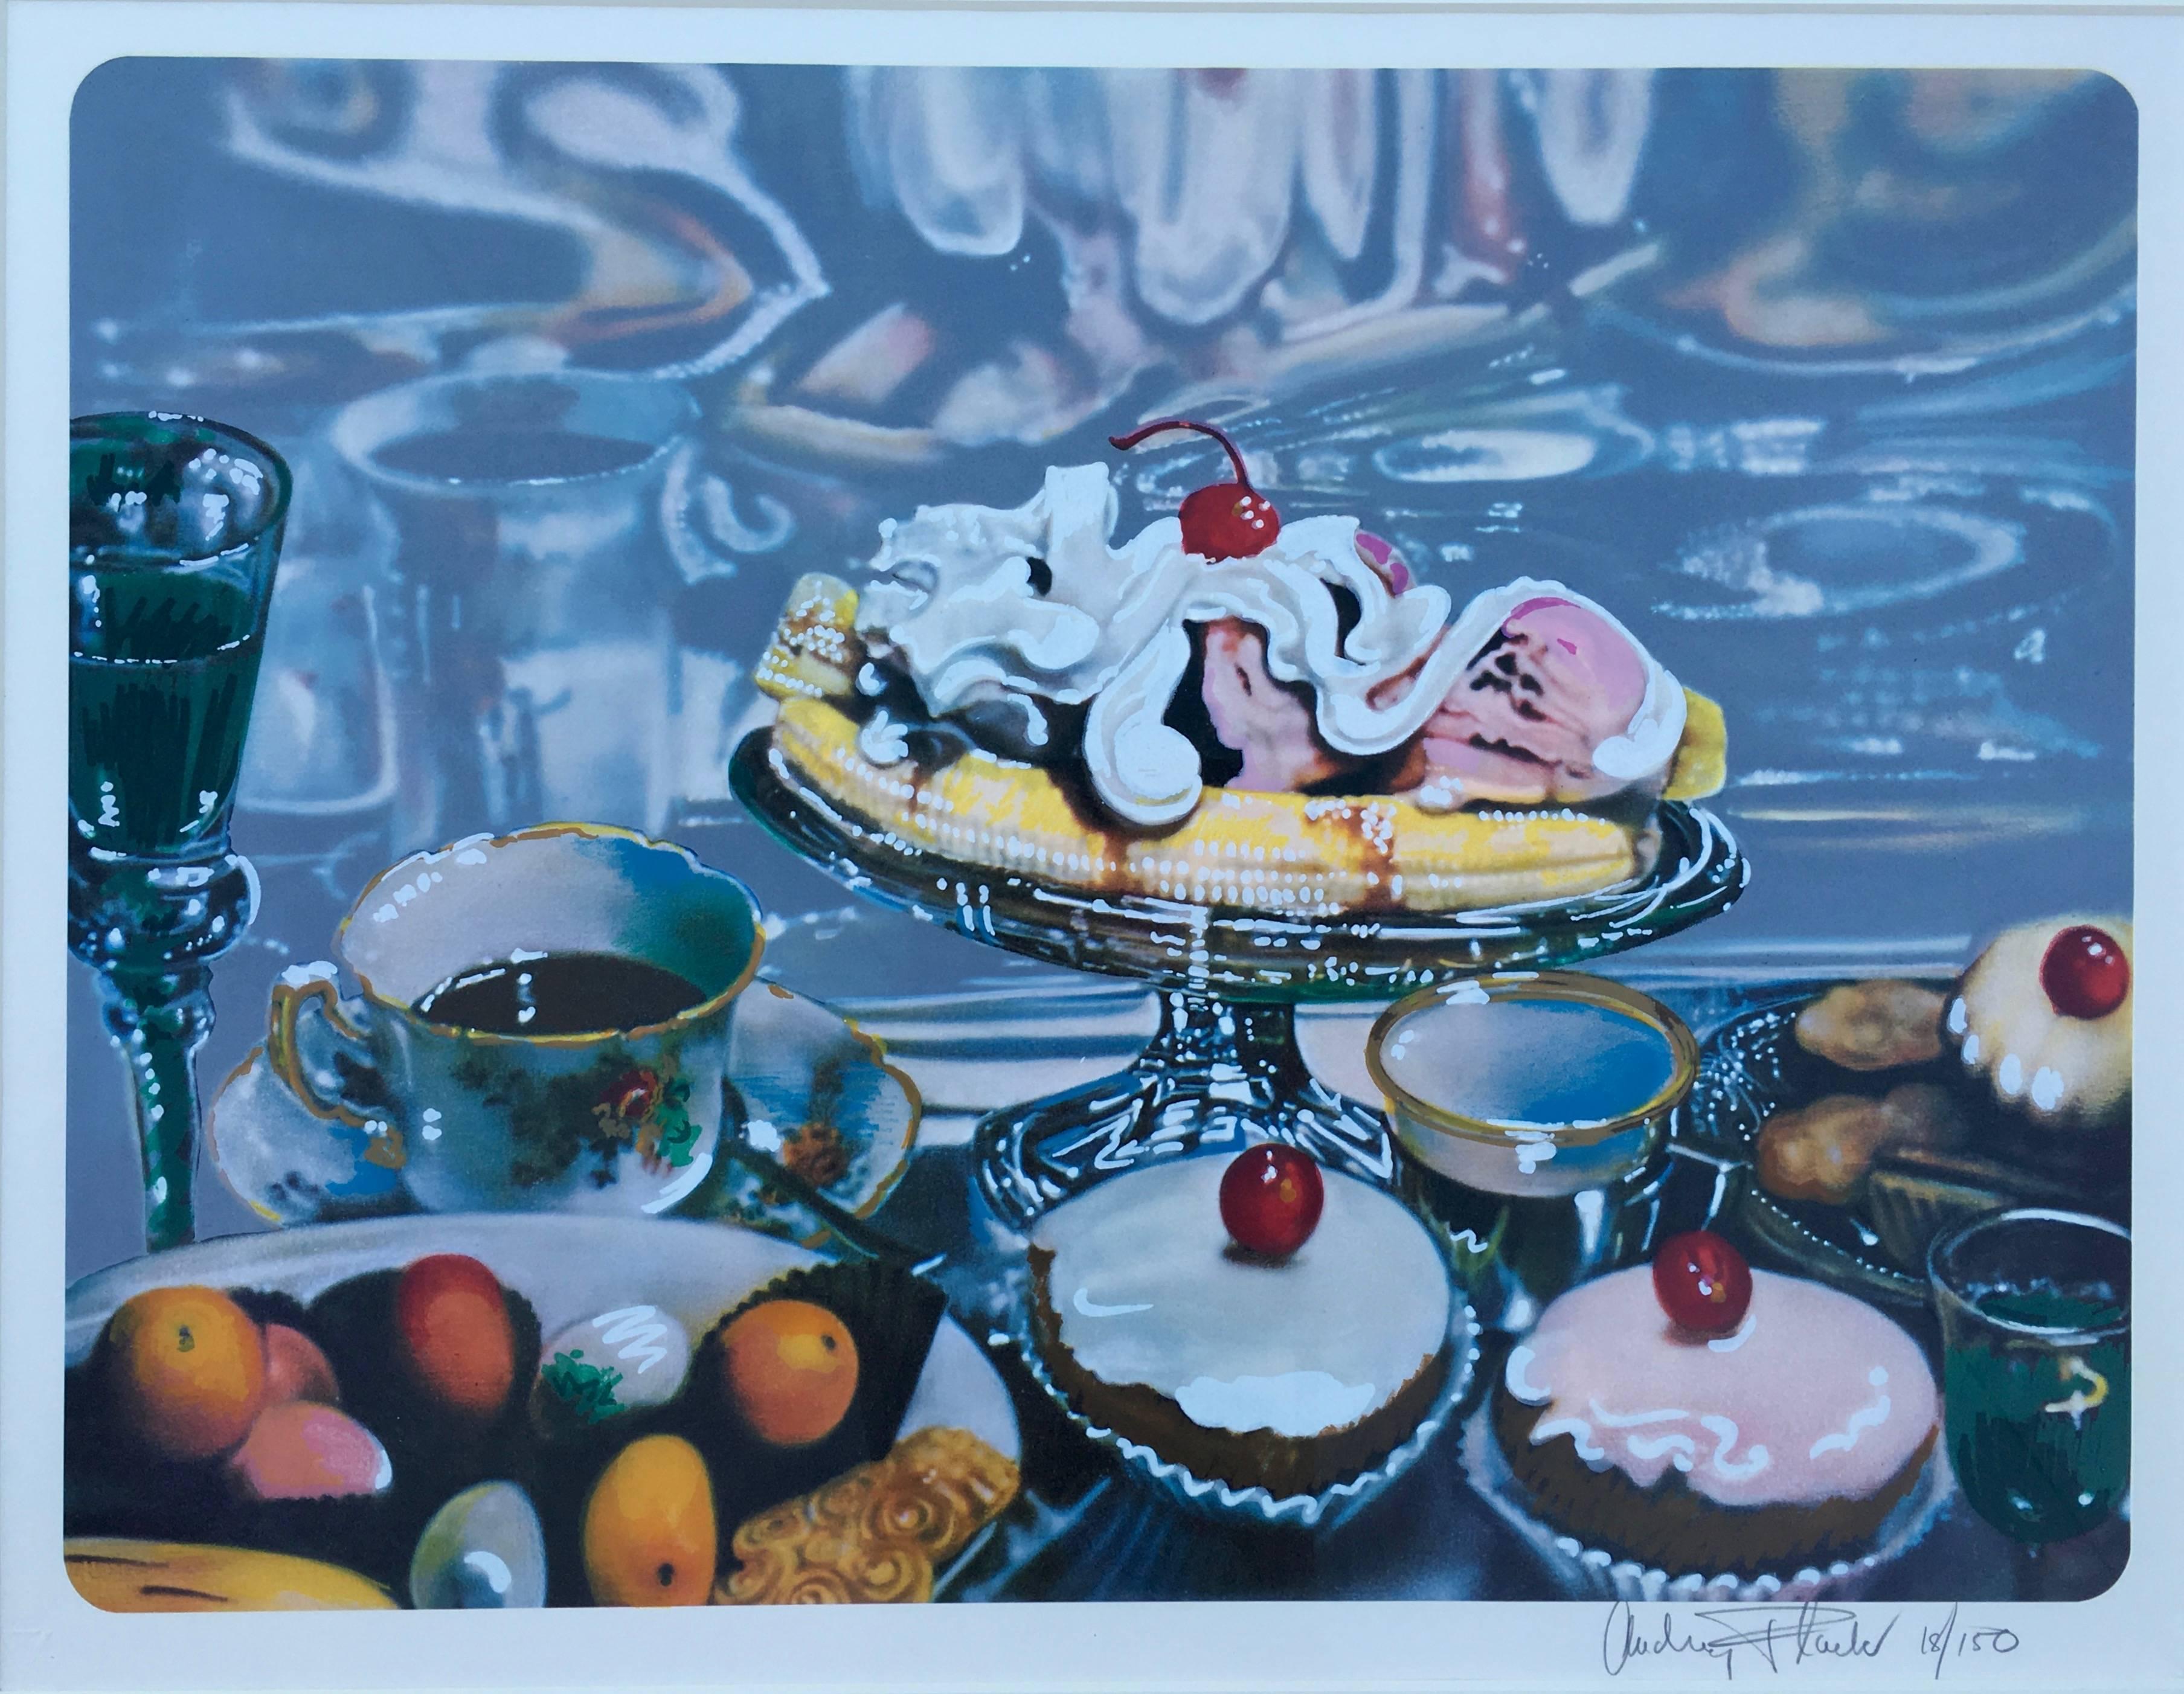 Audrey Flack.
Banana Sundae (from the Presidents Portfolio),
1980.
Embossed screenprint on paper.
18 x 24 inches (plus frame).
Signed lower right.
Edition 150.
Published by the Democratic National Committee.
Excellent